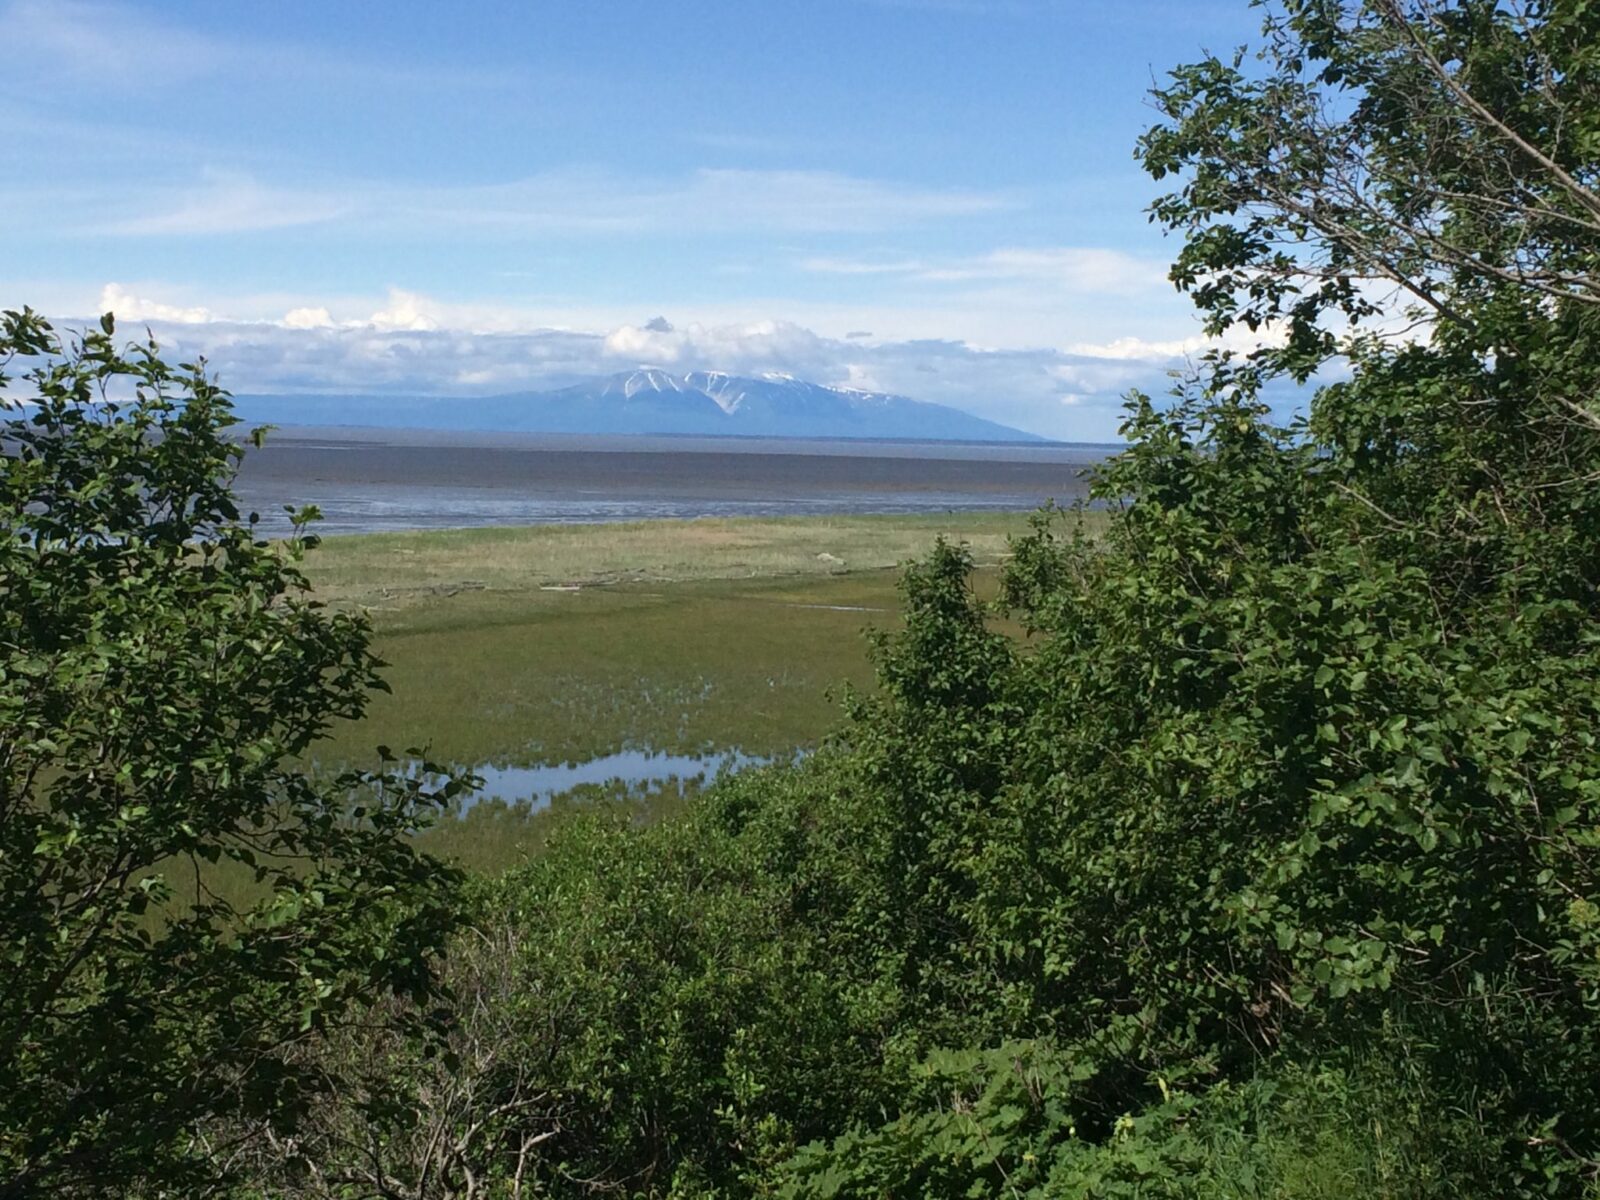 One of the best things to do in Anchorage is walk or bike the coastal trail which goes along the water and tideflats in Anchorage. Distant mountains and clouds can be seen across the water. Trees and bushes are in the foreground